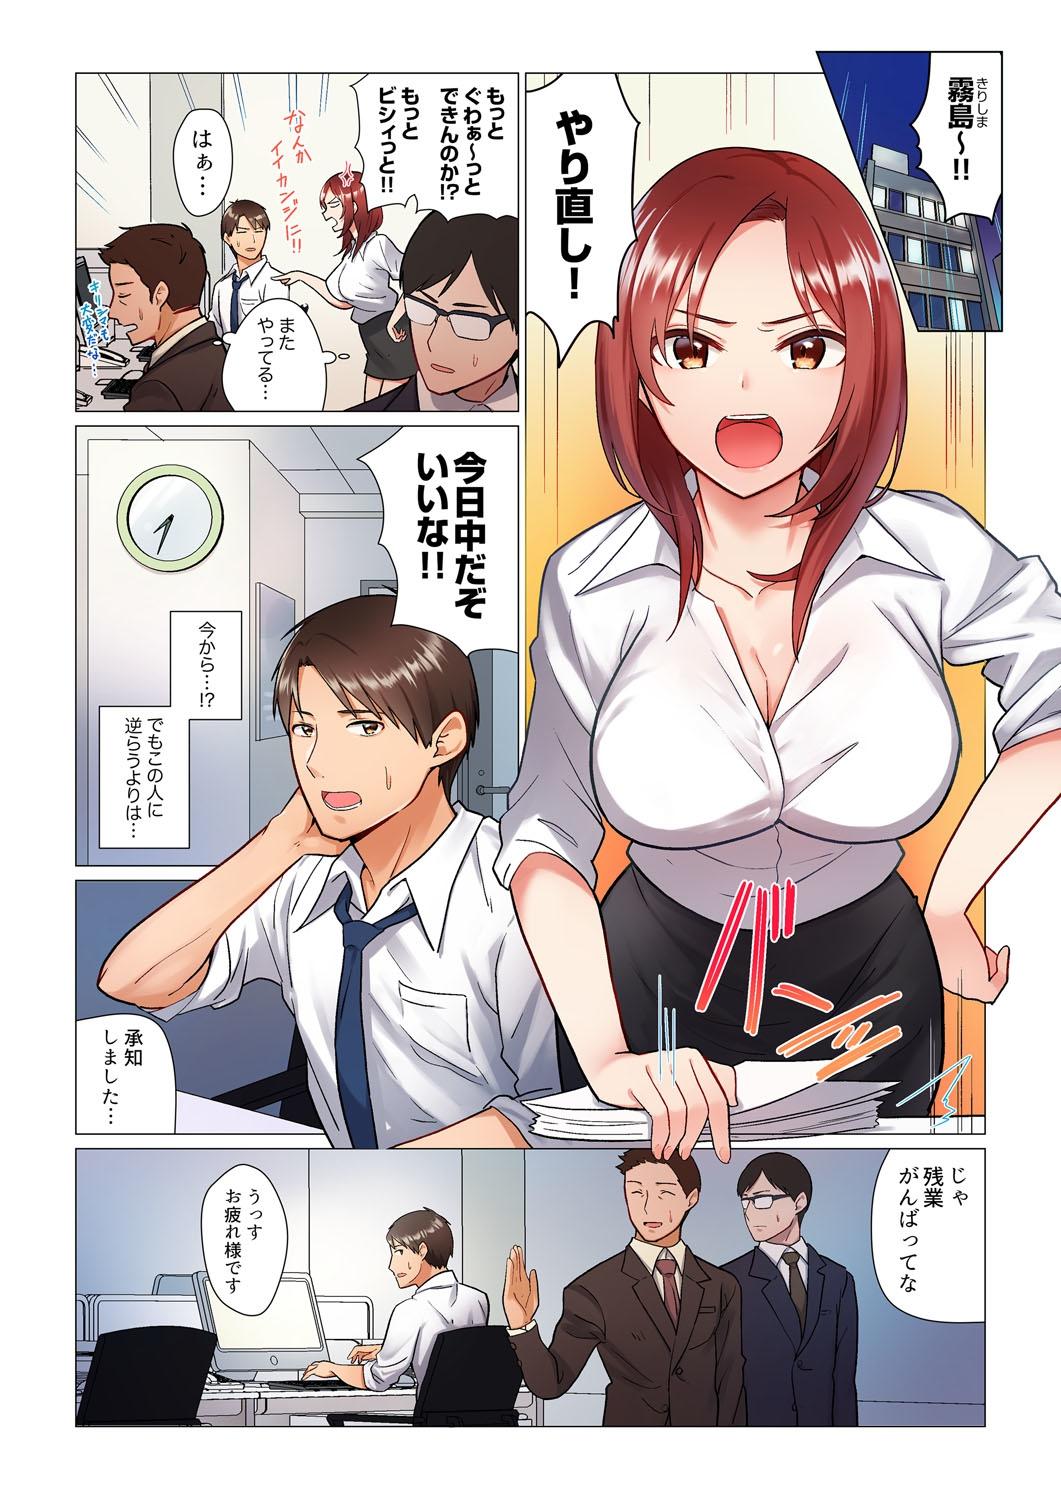 Step 居眠り中の女上司にこっそり挿入（※寝たフリしながらイッてました）1-10 Pounding - Page 3